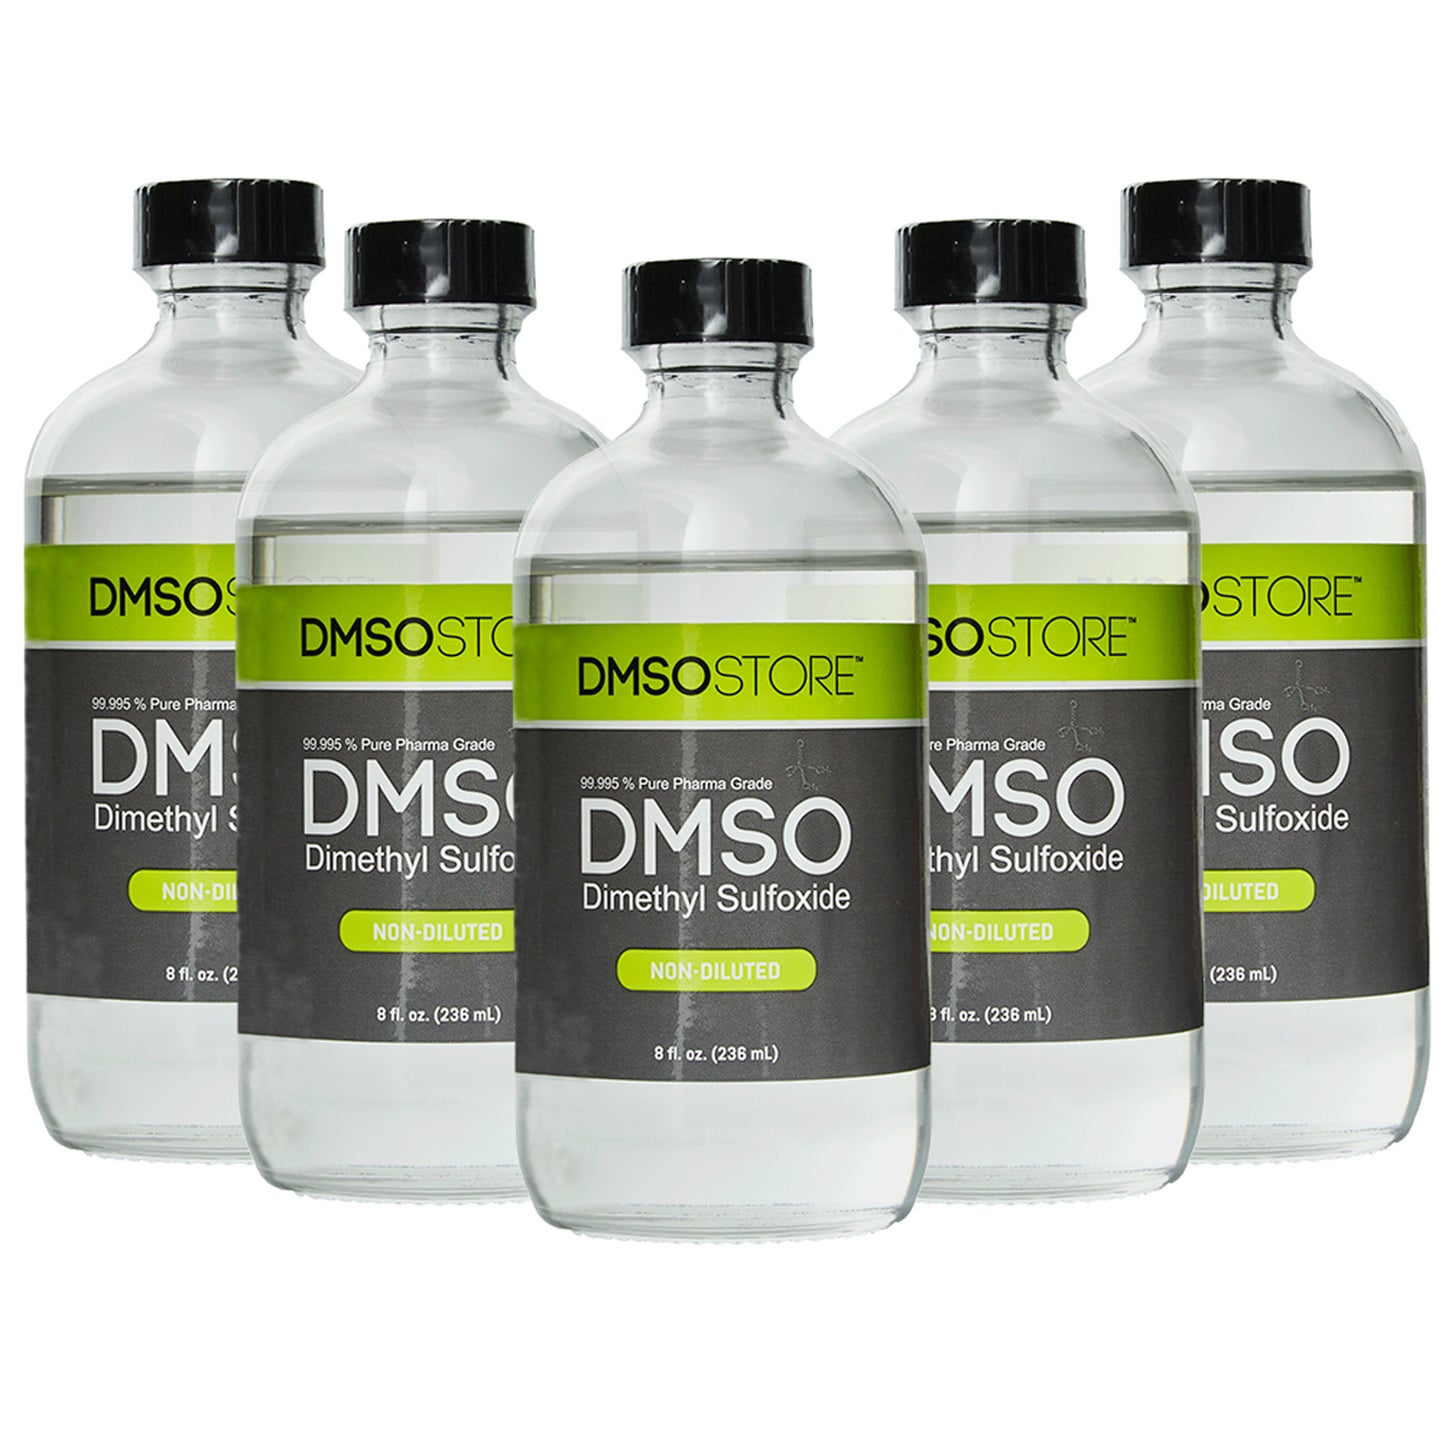 DMSO-liquid-99.995-8oz.-dropper-non-diluted-dimethyl-sulfoxide-natural-acne-buy-5-pack. 5 8 oz glass bottles with Black twist on cap attached to bottle. Label reads 99.995% Pure pharma Grade DMSO (Dimethyl Sulfoxide) 8oz.